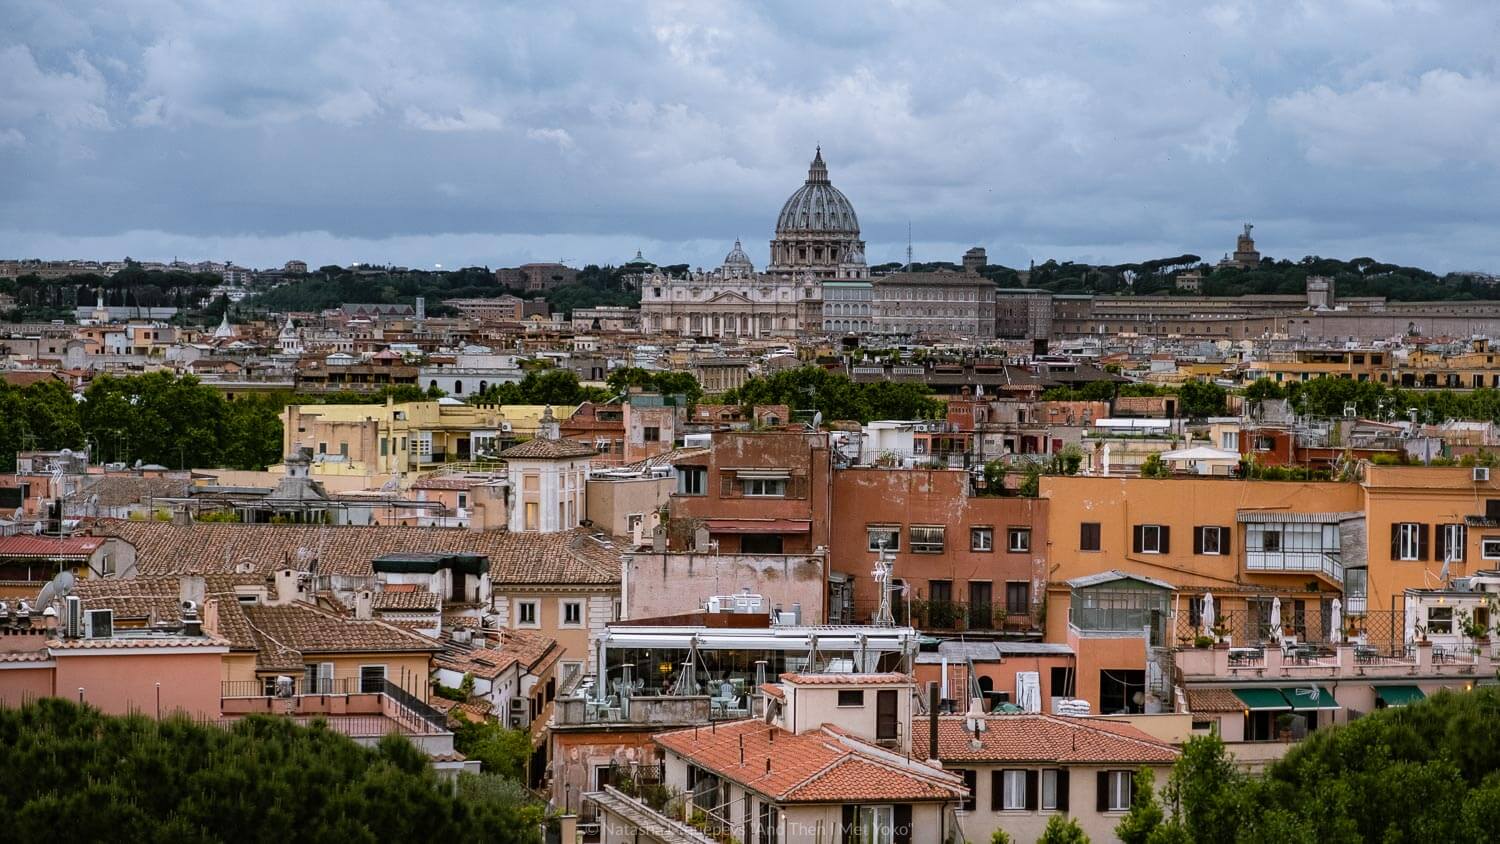 Views of Rome from Terrazza Viale. Travel photography and guide by © Natasha Lequepeys for "And Then I Met Yoko". #rome #italy #travelblog #travelphotography